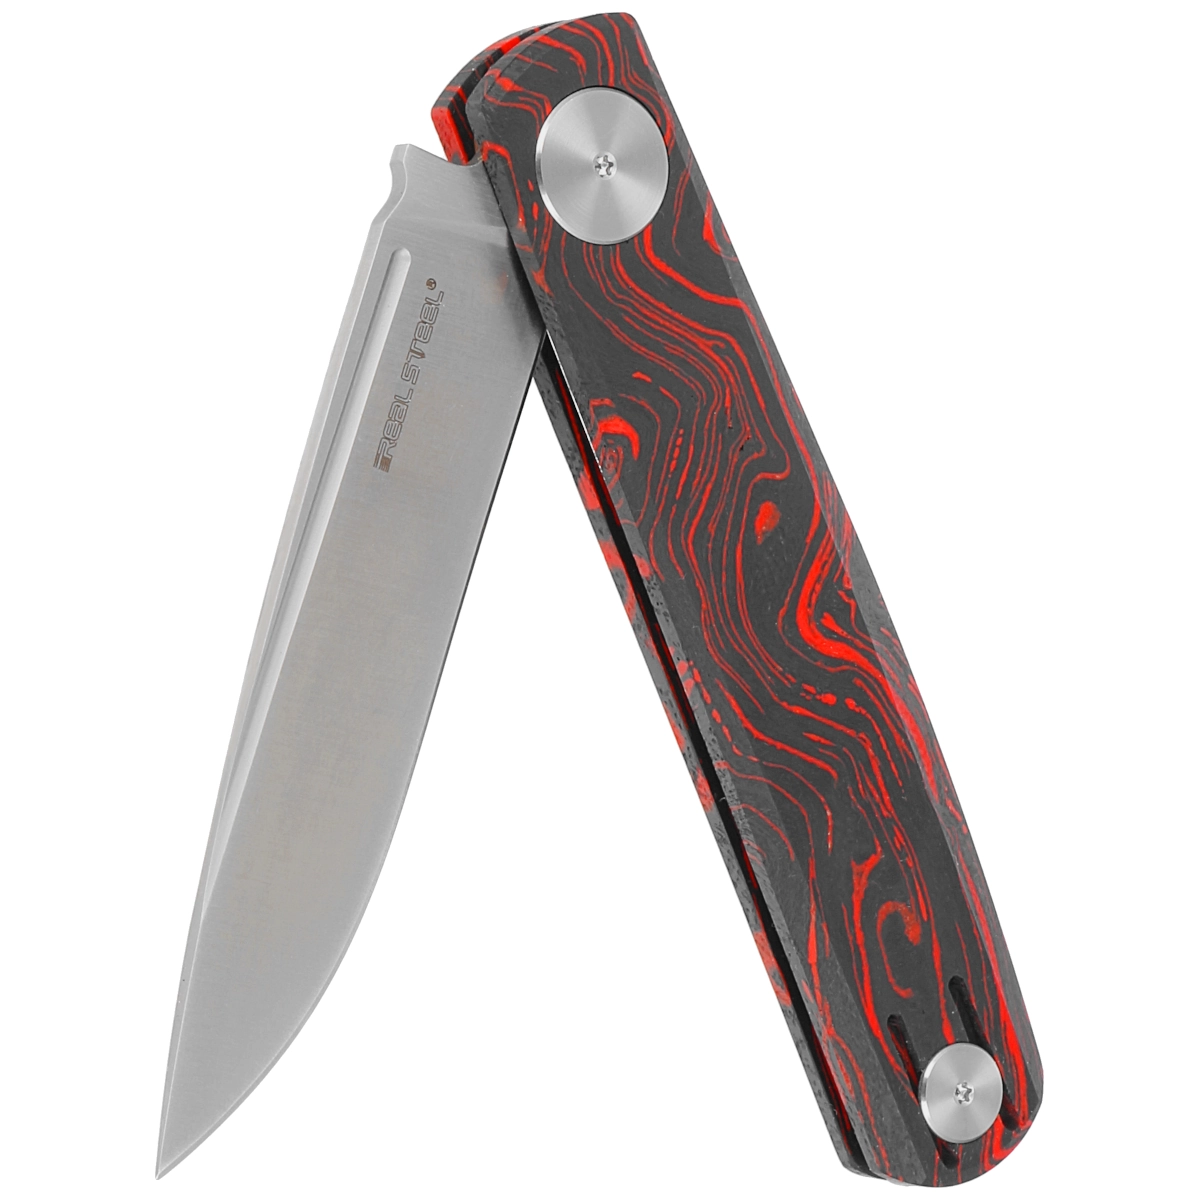 Real Steel Gslip Compact Damascus G10 Ocean Red Slip Joint